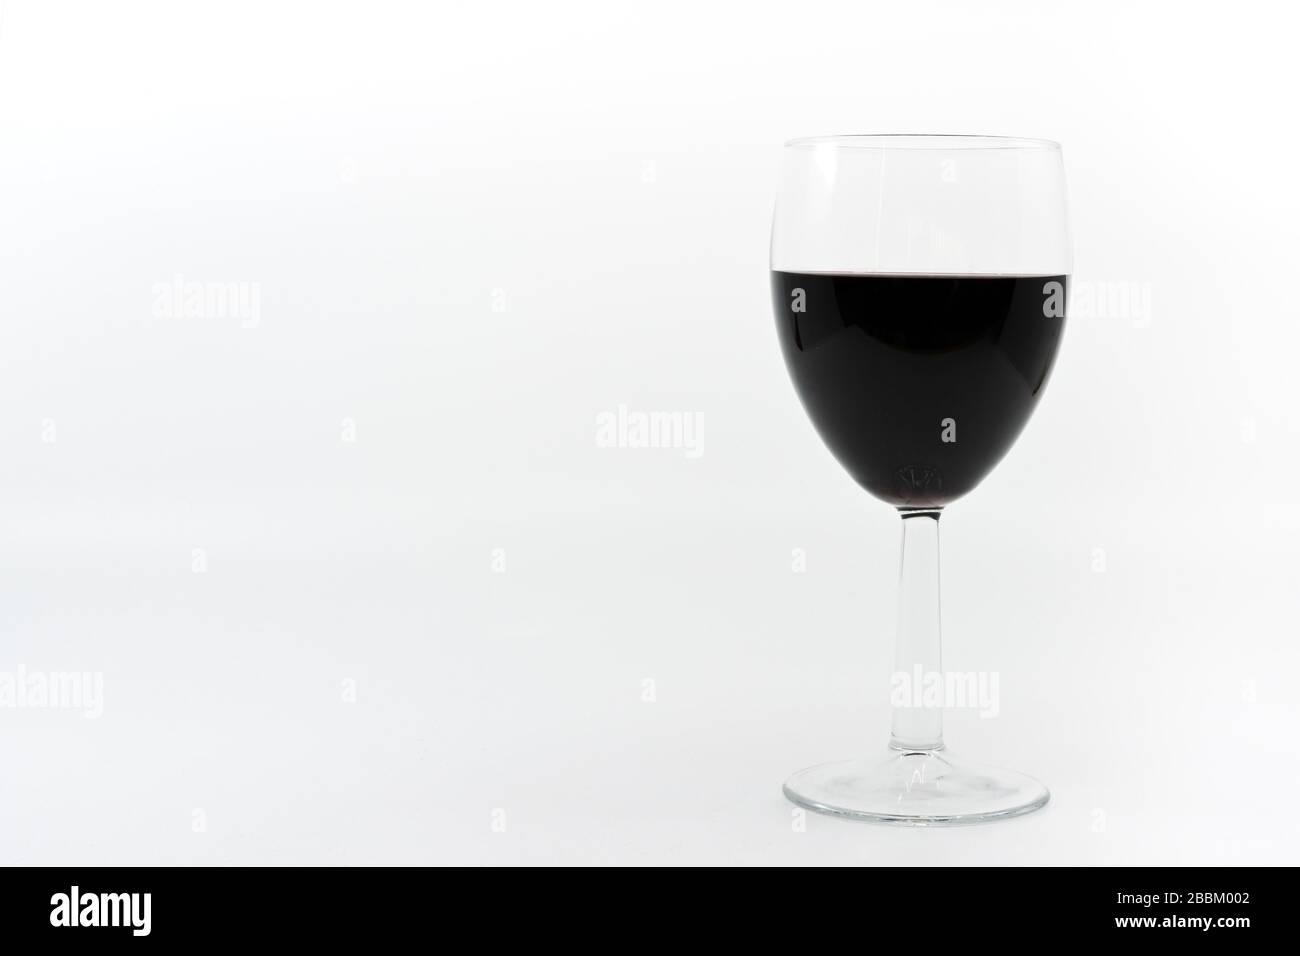 Glass of red wine on a plain white background with space for copy Stock Photo